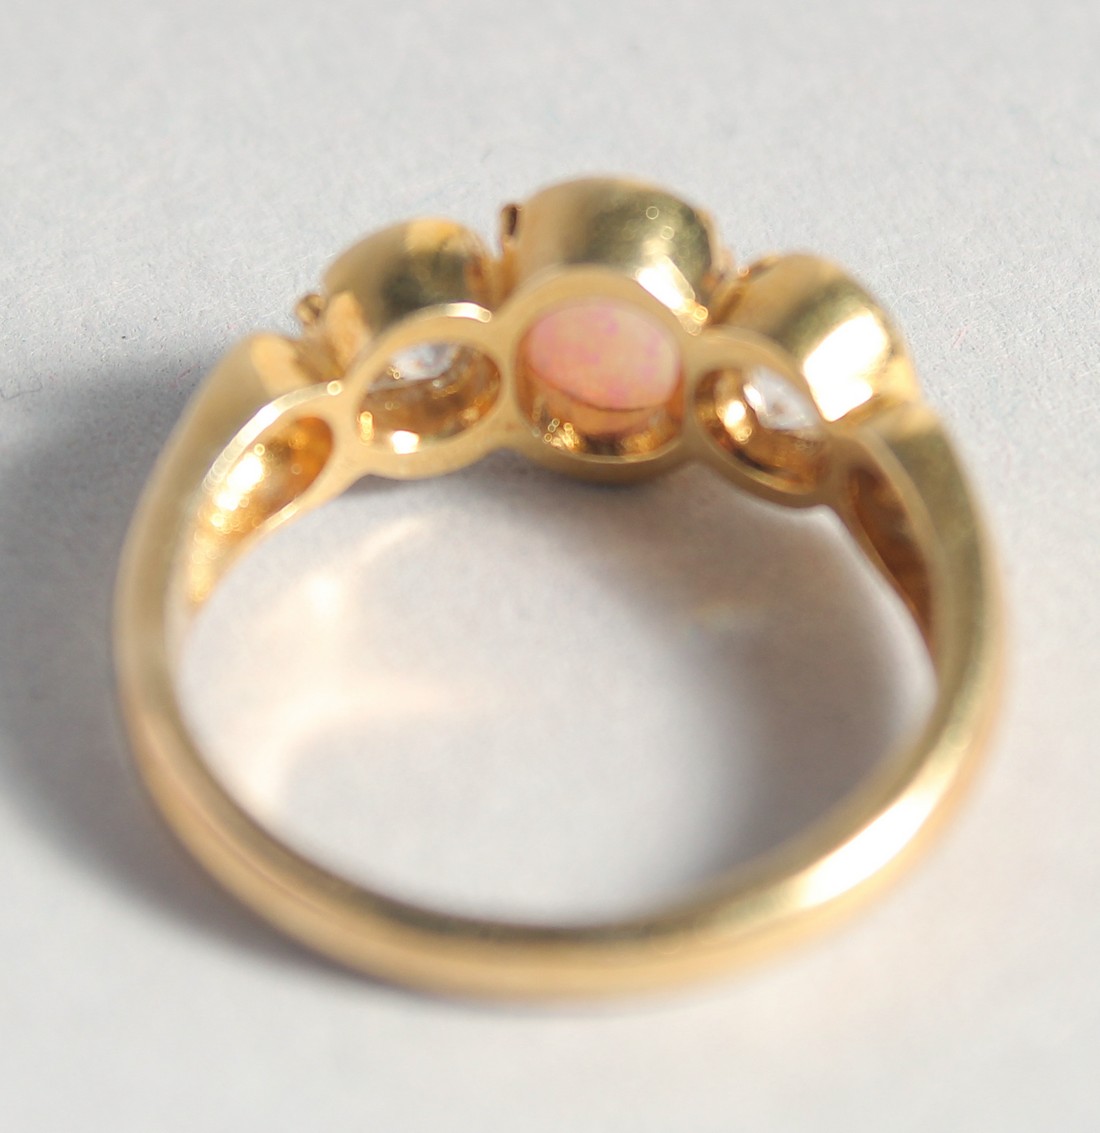 A SILVER 18ct. GOLD-PLATED OPAL AND CUBIC ZIRCONIA RING. - Image 3 of 3